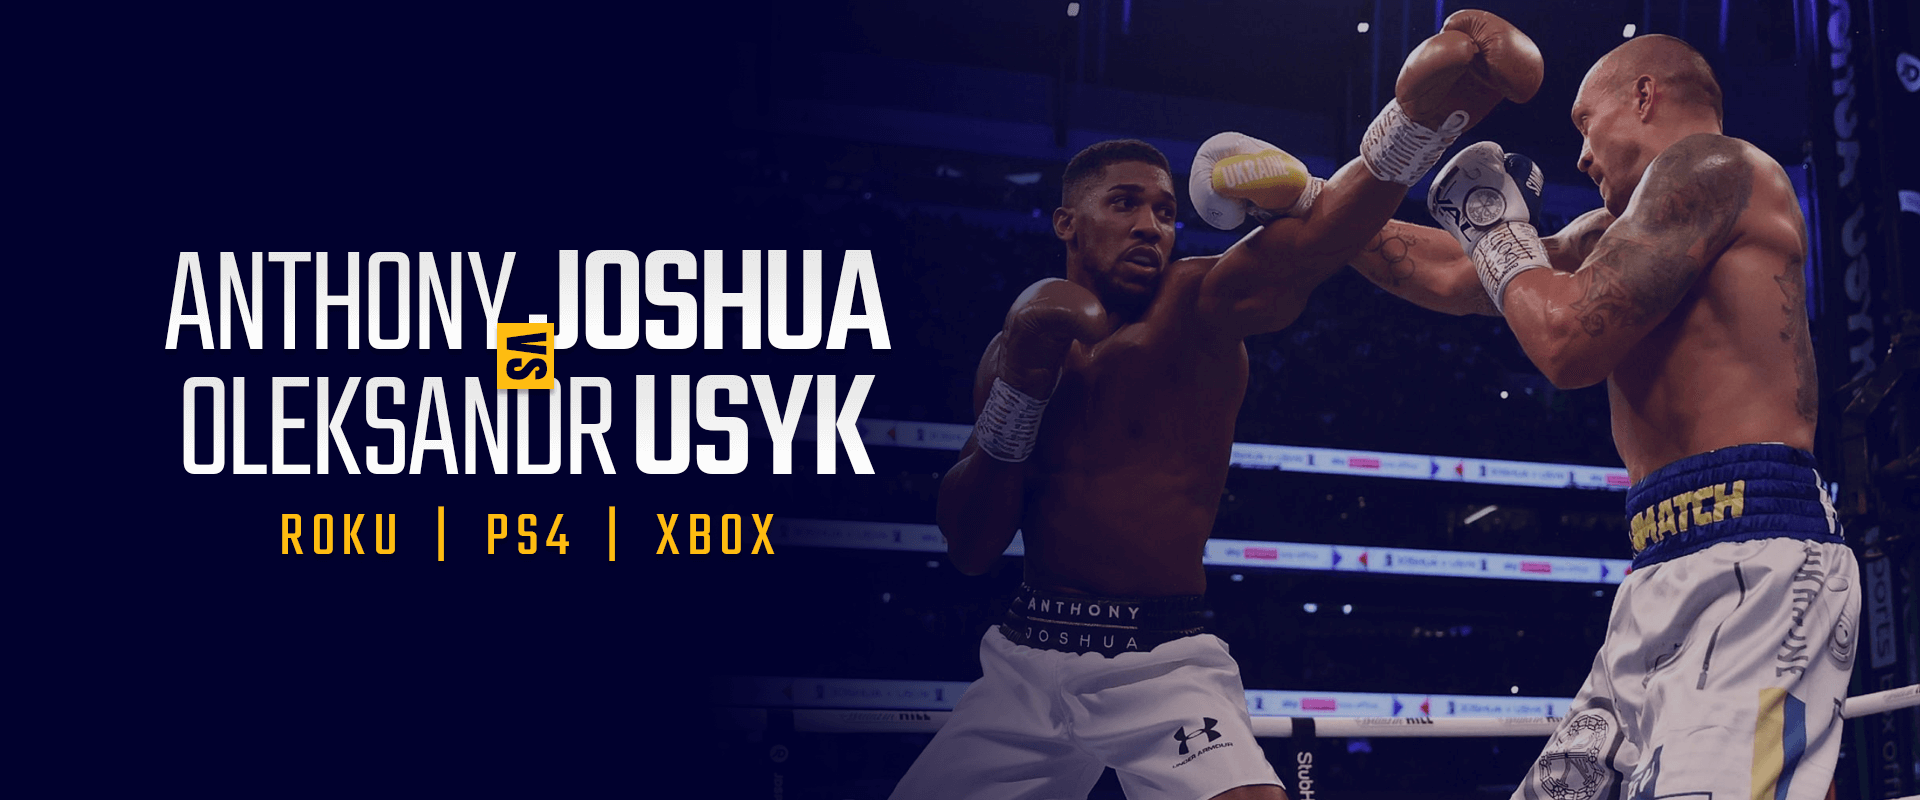 How to Watch Anthony Joshua vs Oleksandr Usyk 2 on Roku and PS4/Xbox